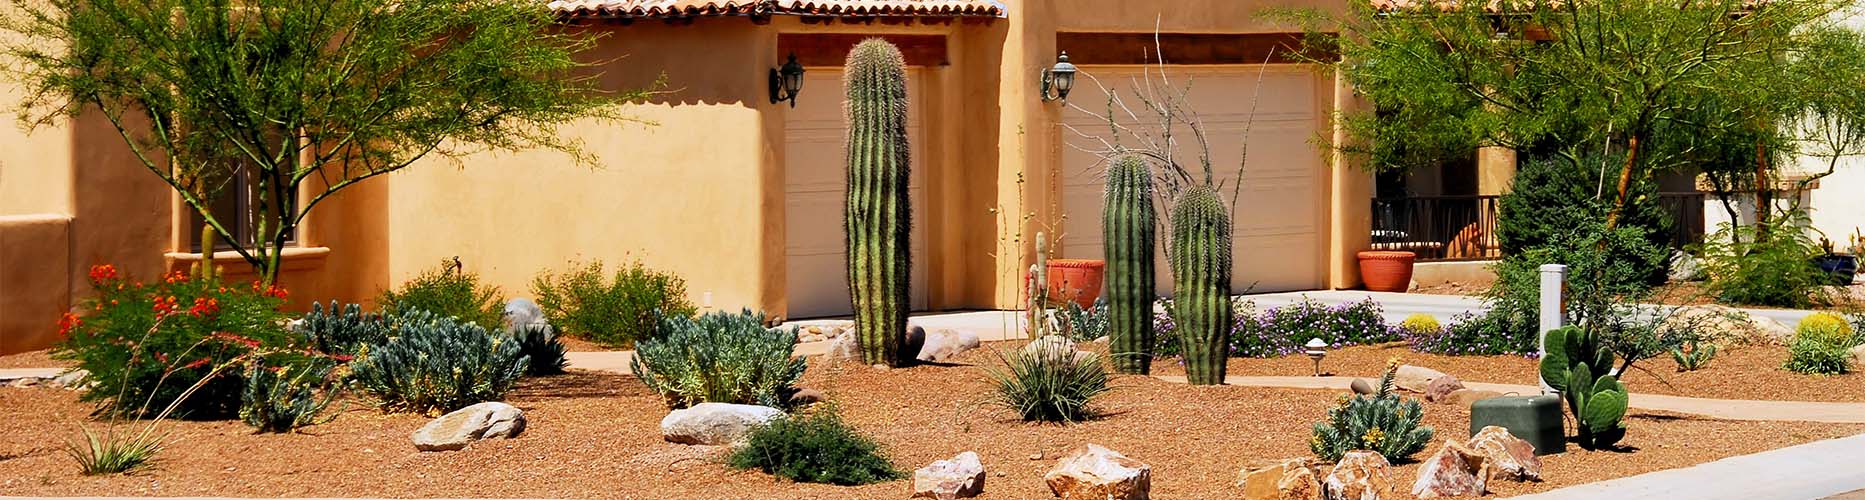 Desert homefront with cacti in front of house